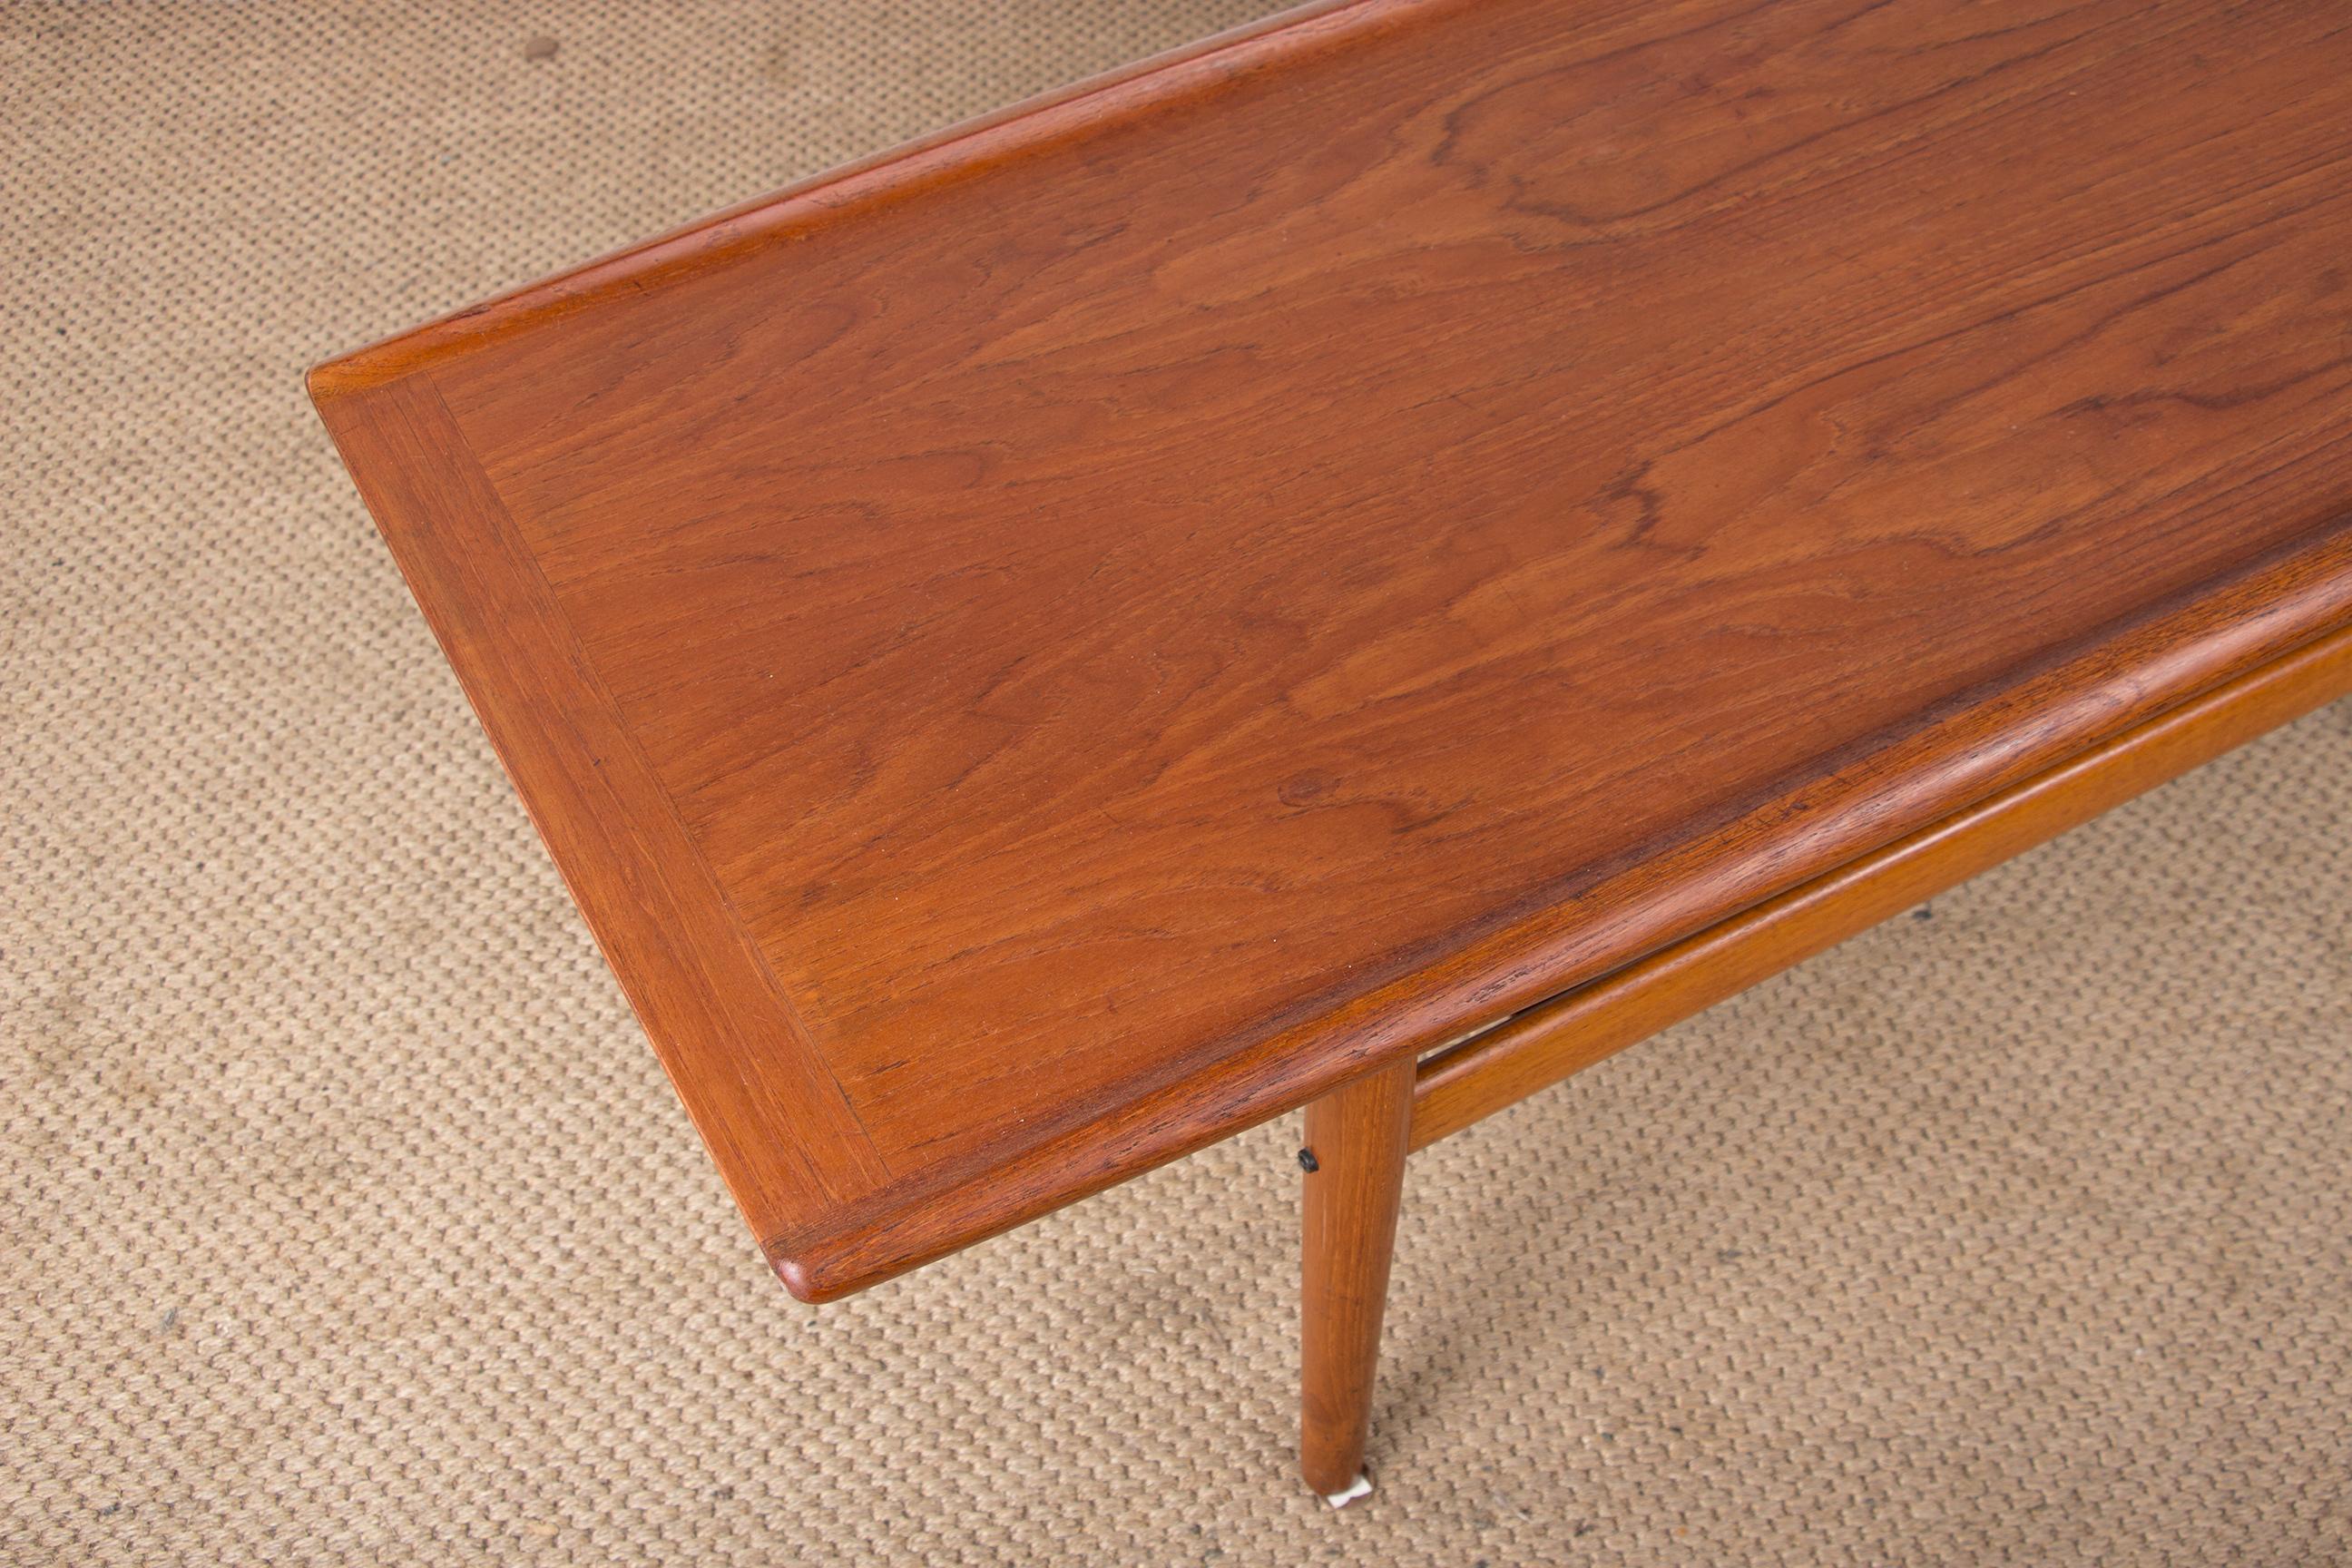 Danish Teak coffee table, two levels, by Grete Jalk for Glostrup Mobelfabrik 196 For Sale 4